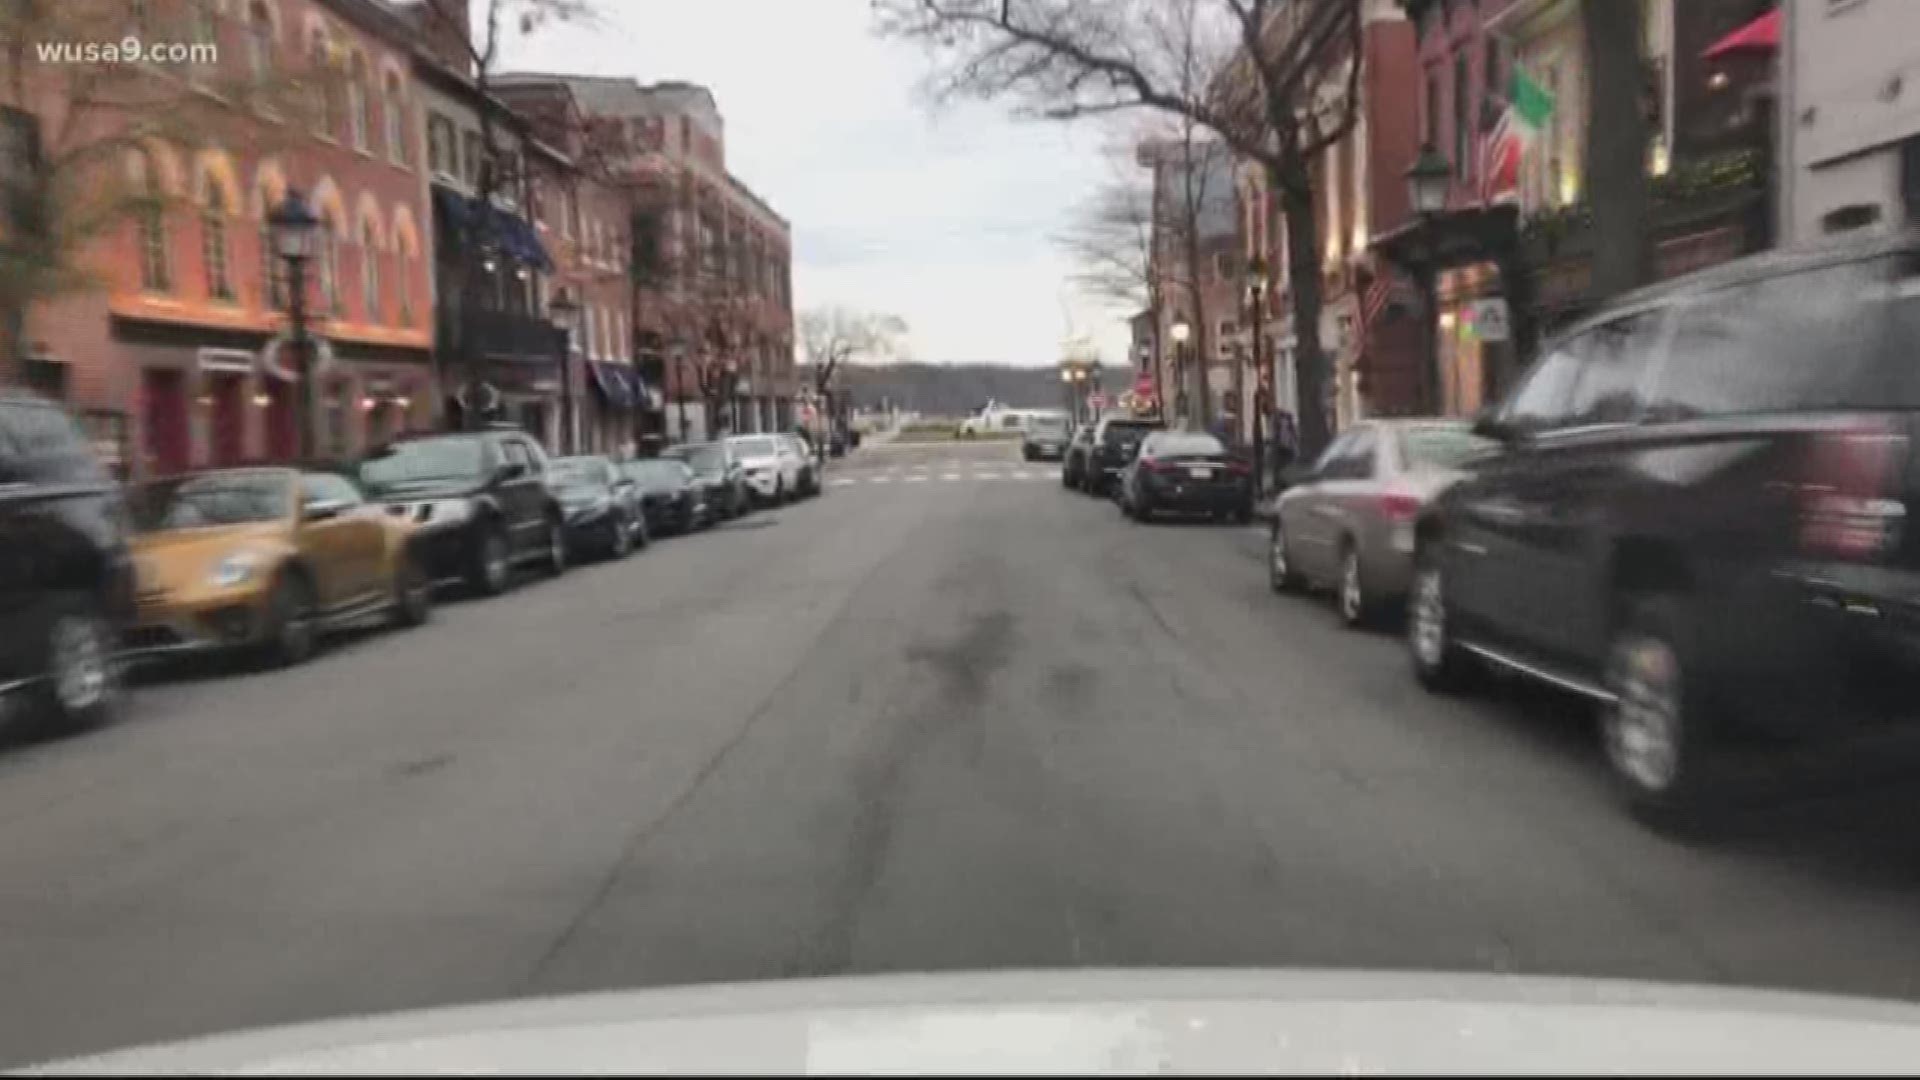 If approved by the Alexandria City Council, the 100 block of King Street would be closed to cars on Saturdays and Sundays.